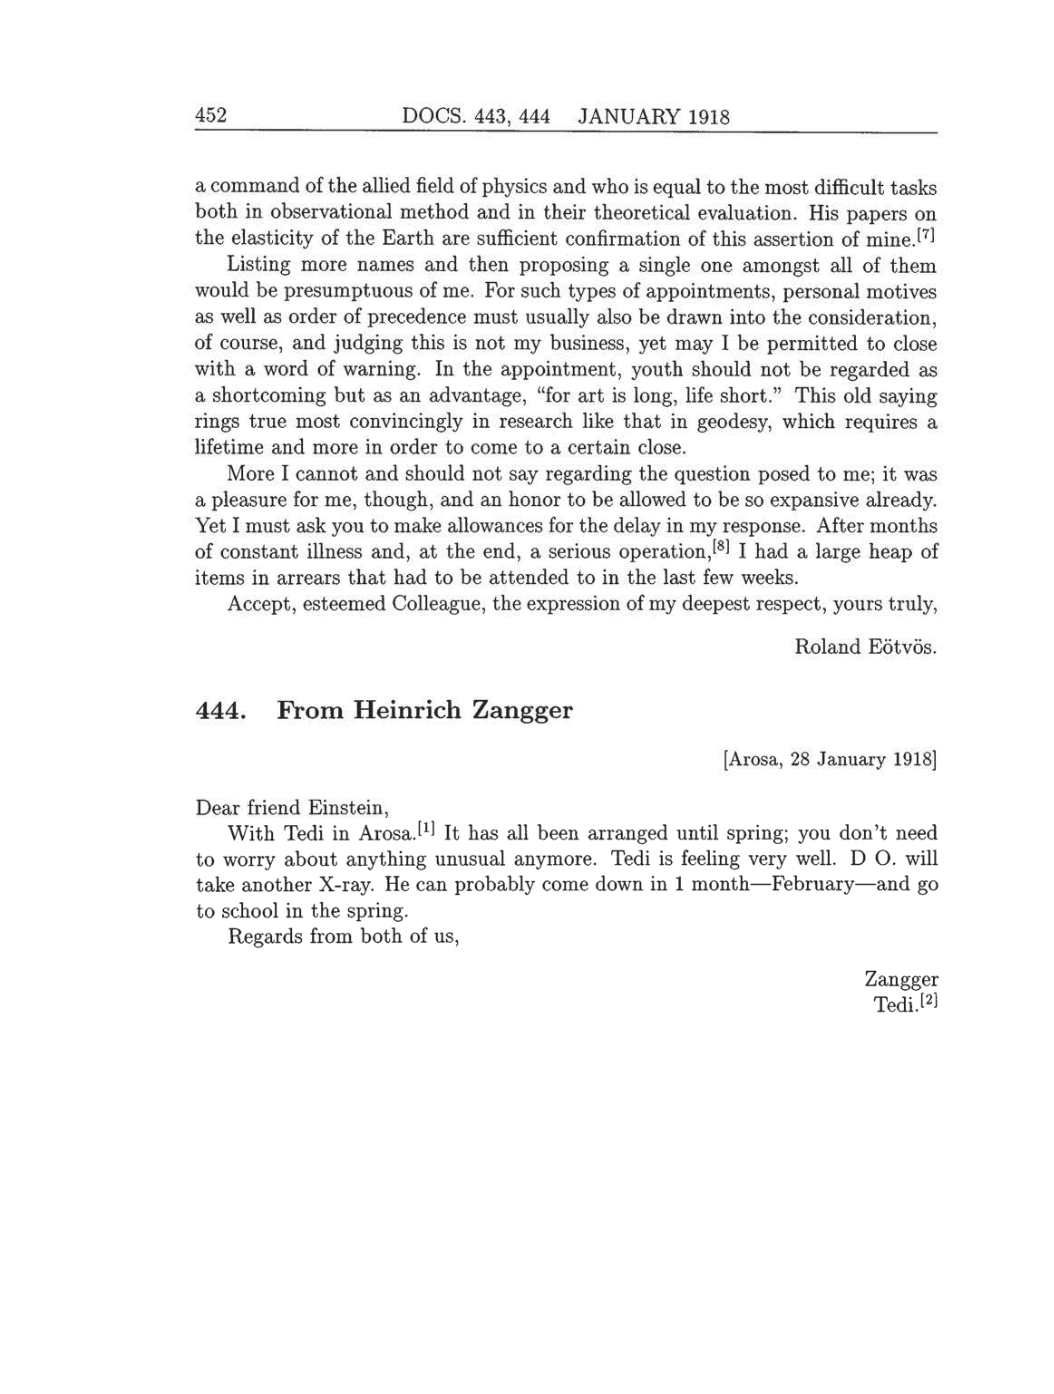 Volume 8: The Berlin Years: Correspondence, 1914-1918 (English translation supplement) page 452